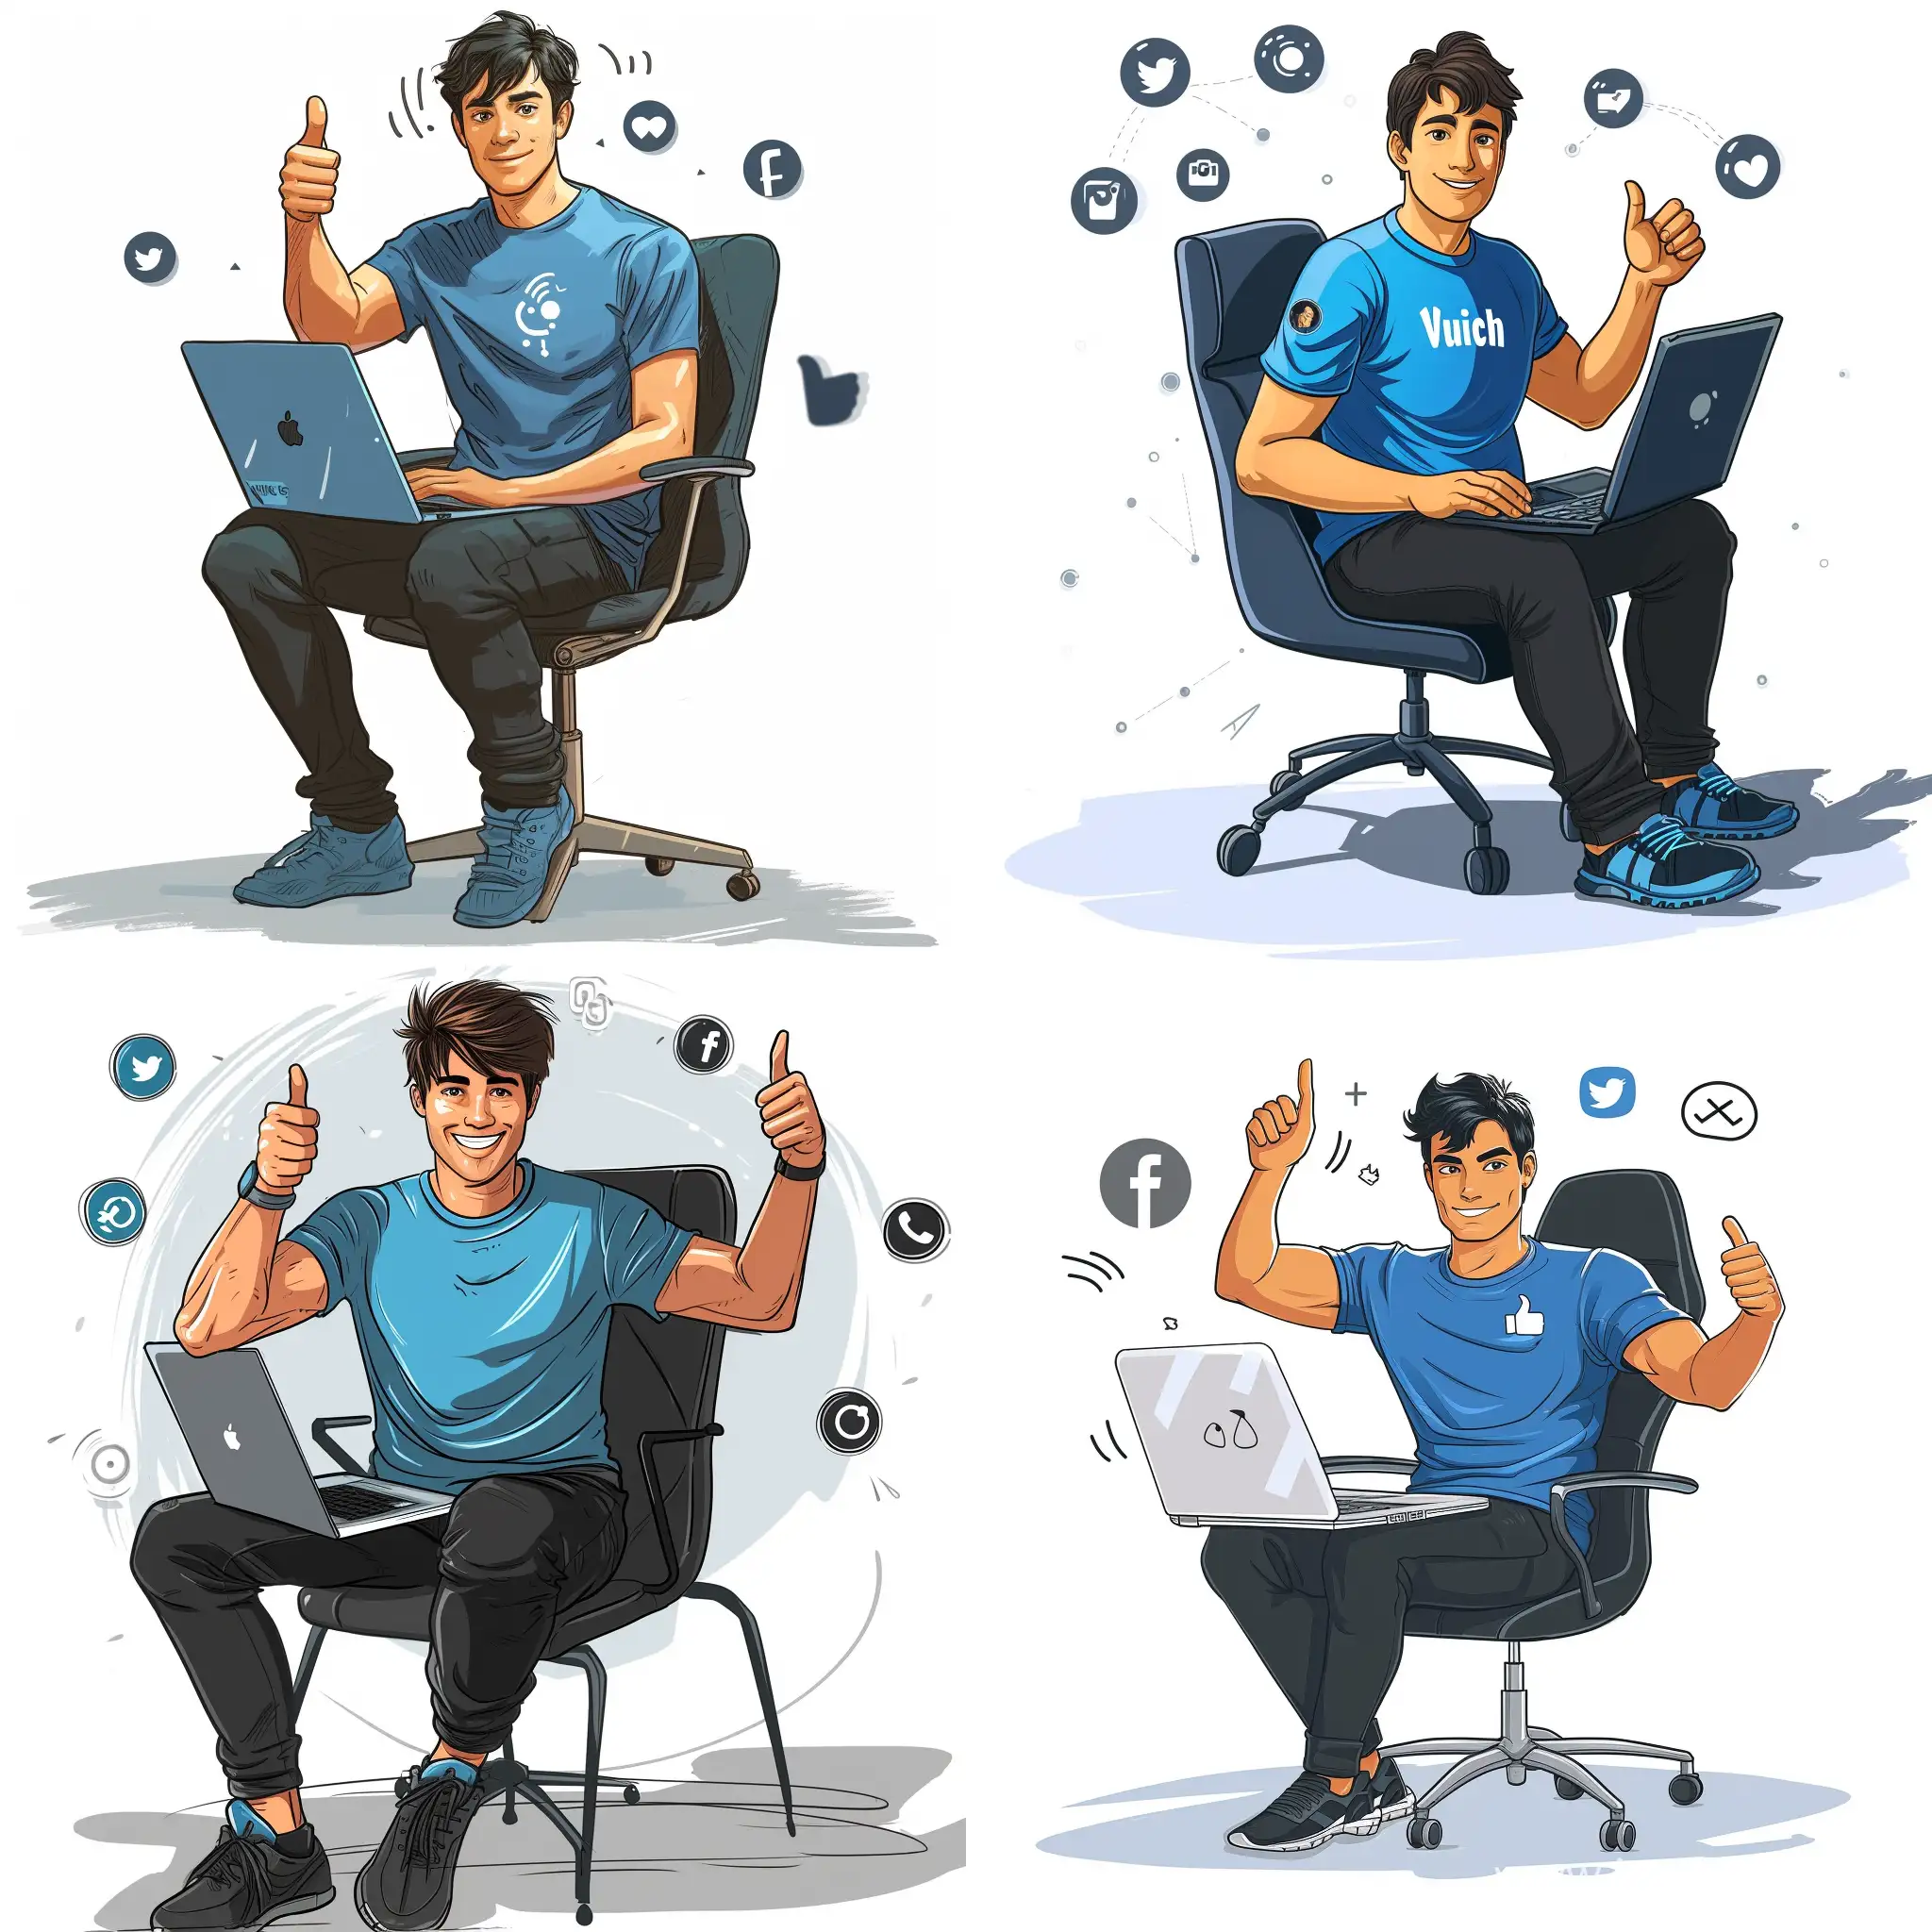 A 25-year-old man wearing a blue T-shirt and black pants is sitting on a chair and in front of a laptop.  He appears to be a programmer, waving with a thumbs up looking at the camera and there are social media icons around. Victor sketch drawing illustrator style on white background. 